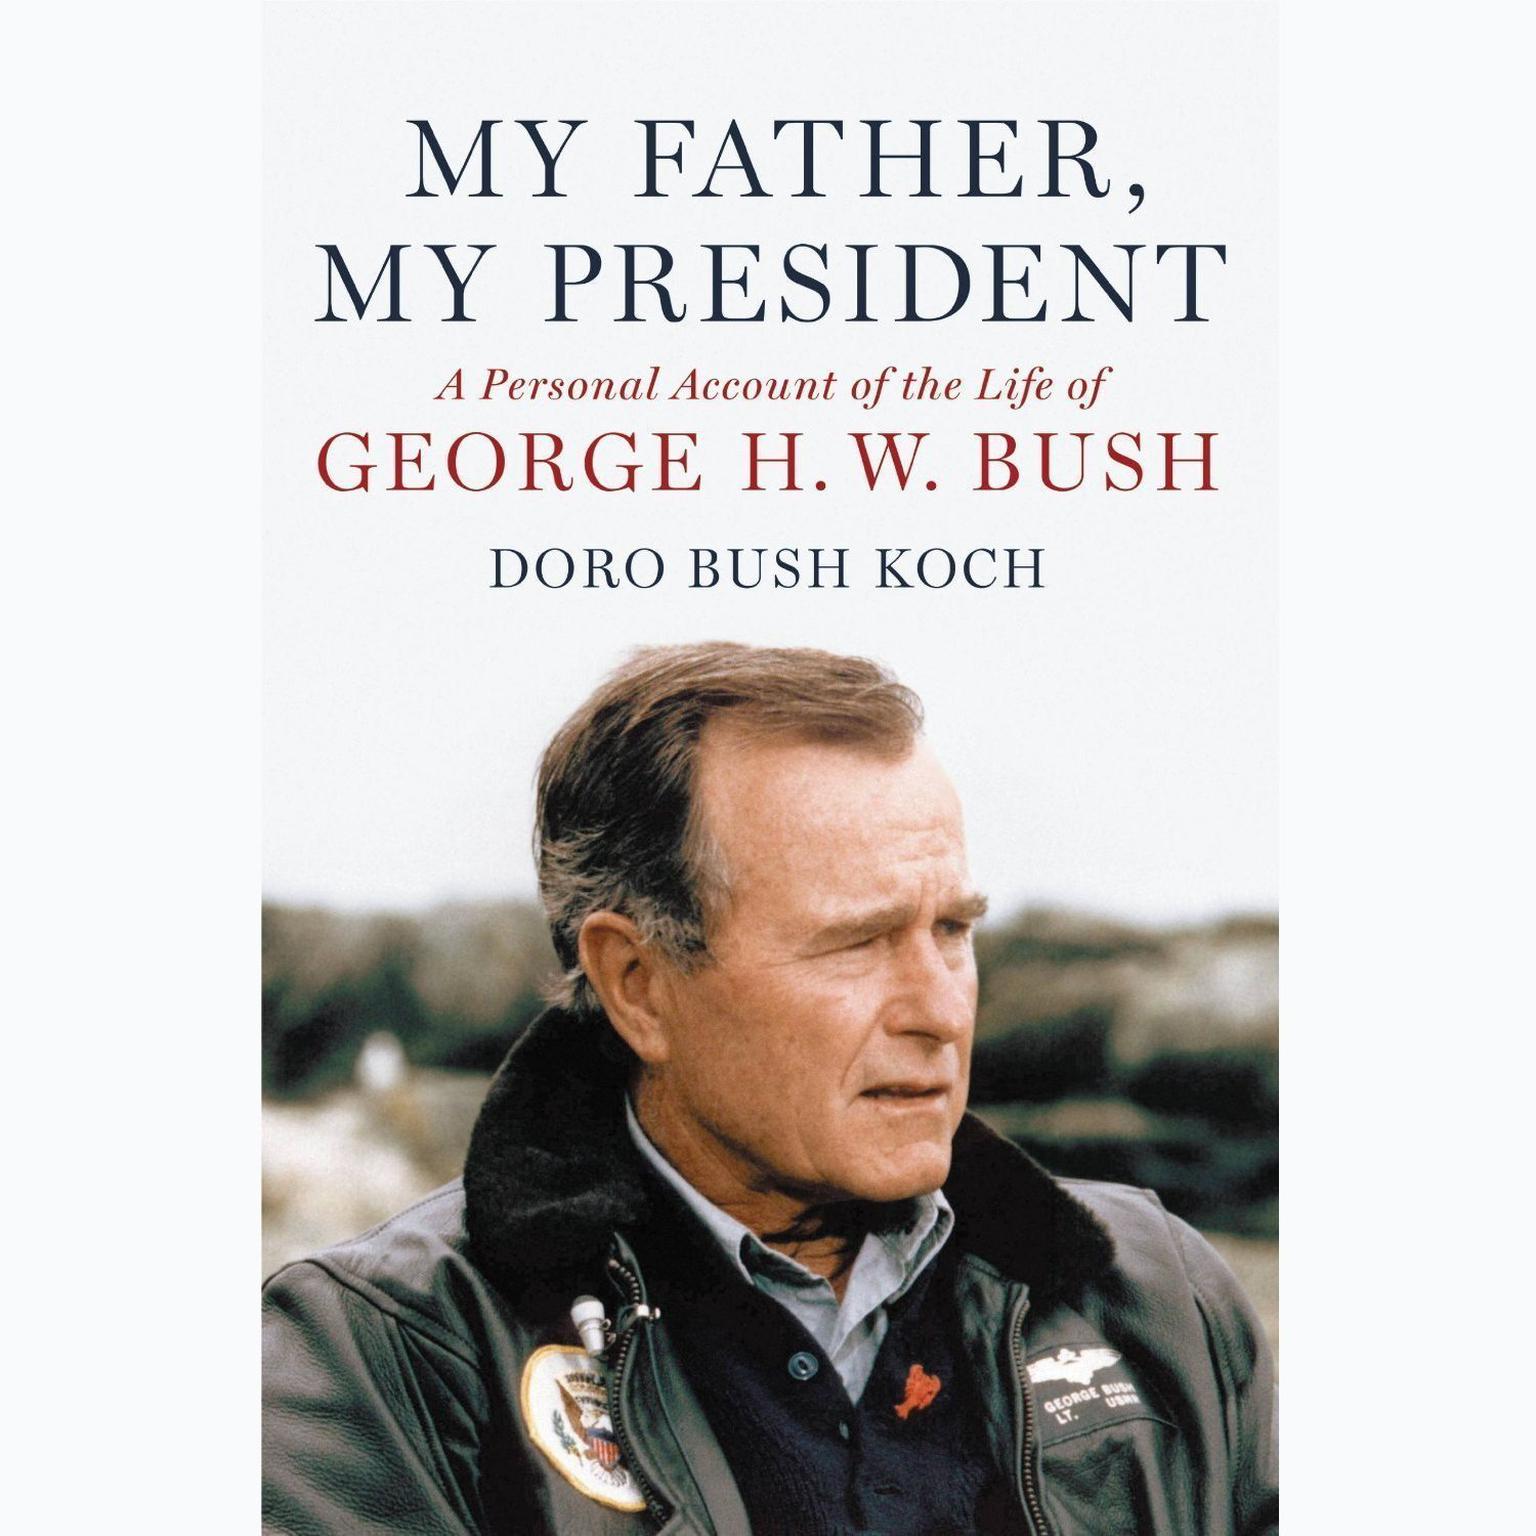 My Father, My President: A Personal Account of the Life of George H. W. Bush Audiobook, by Doro Bush Koch